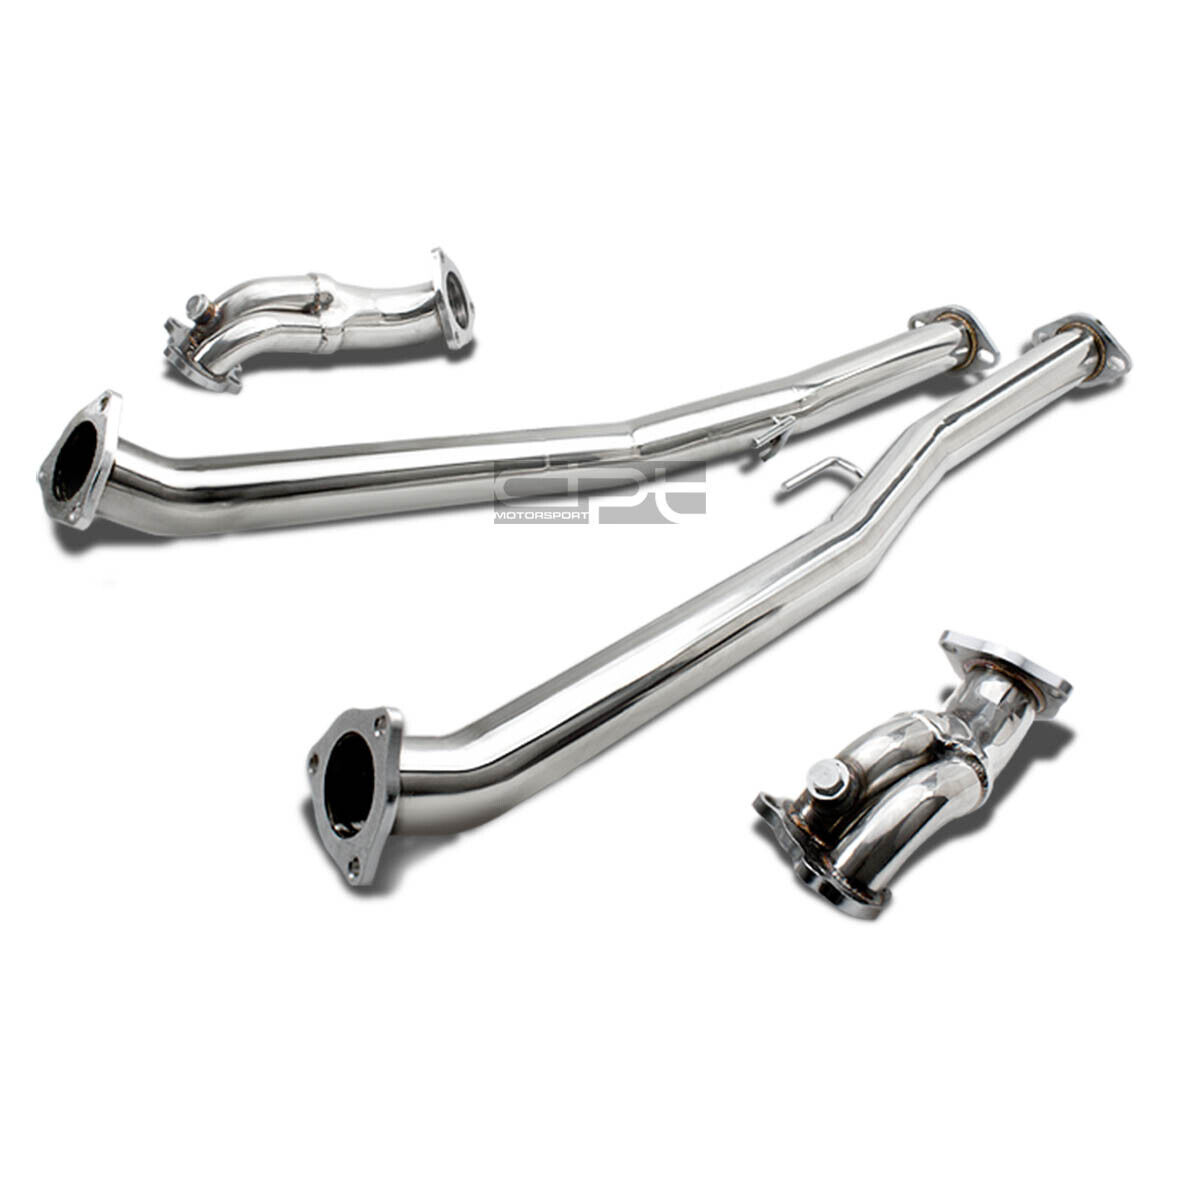 Fit 90-96 300Zx Turbo Fairlady Z Z32 Vg30Dett Stainless Racing Downpipe Exhaust